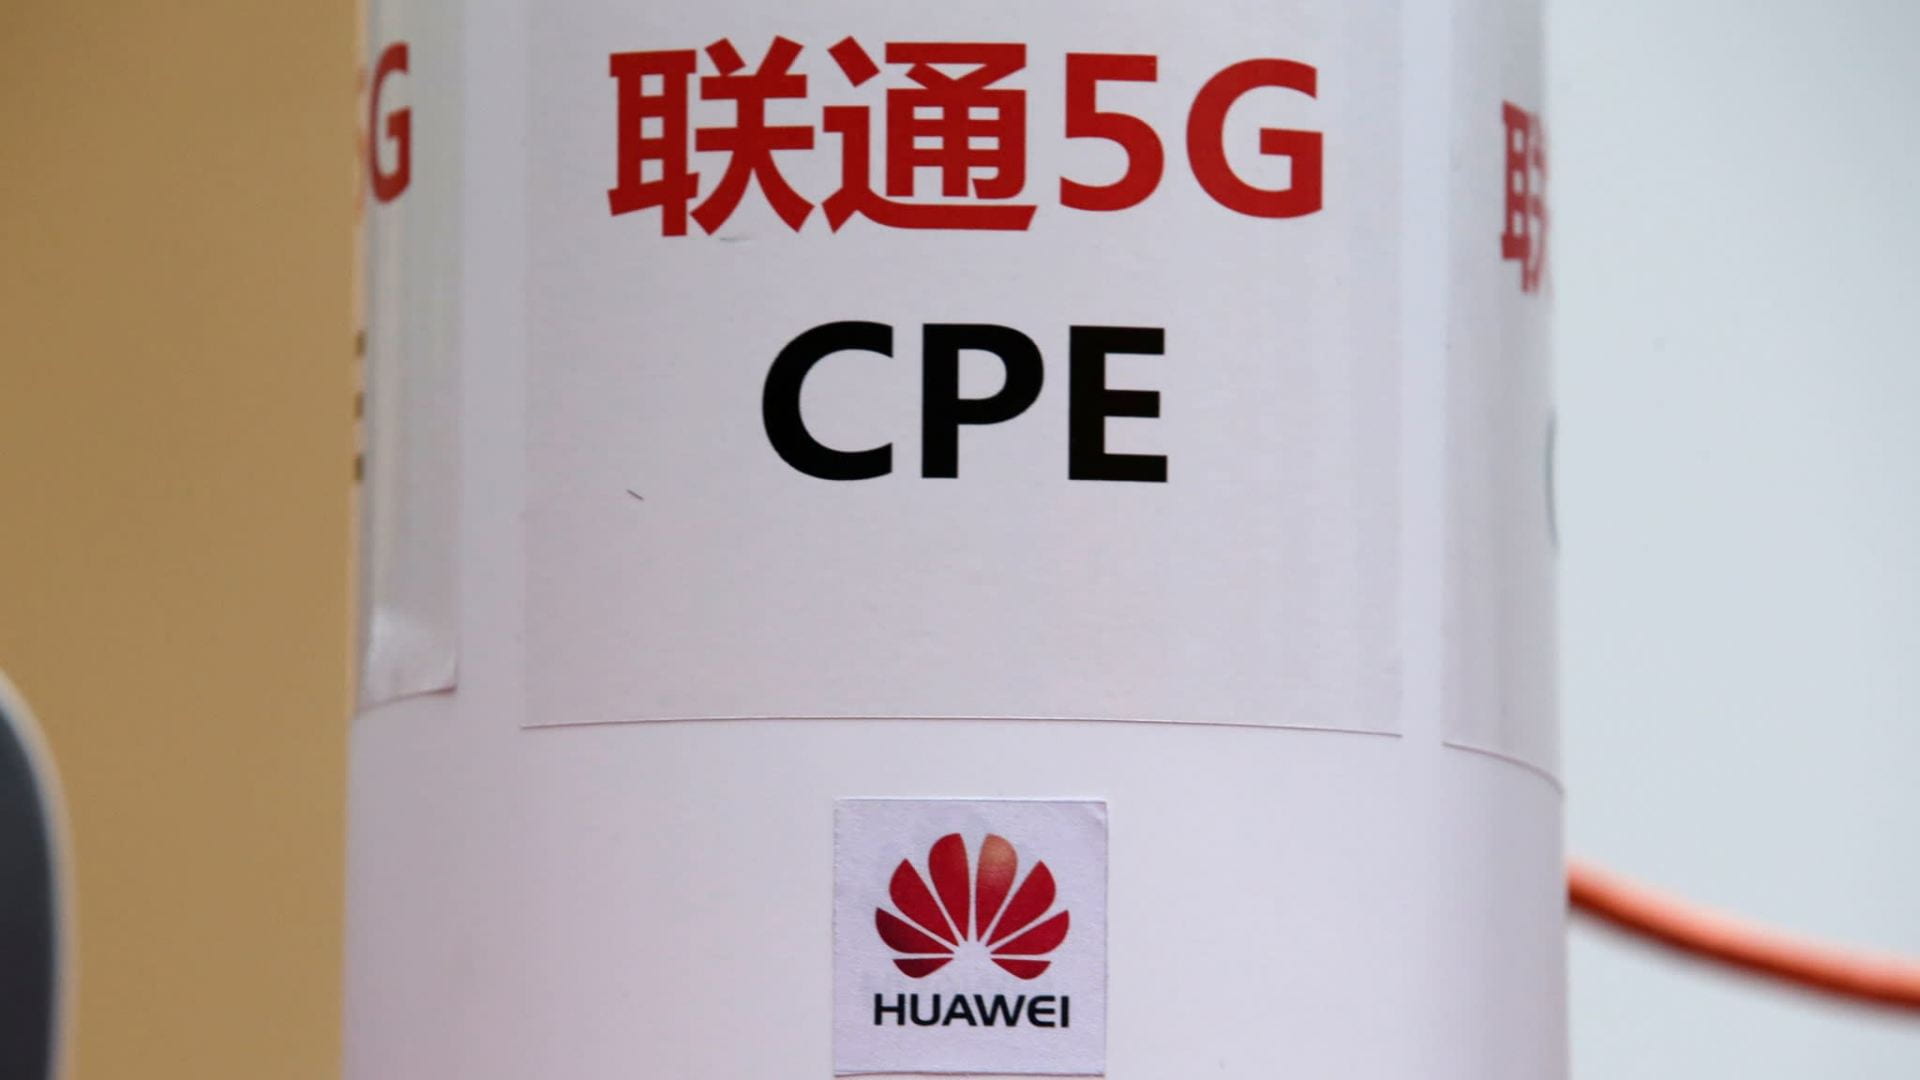 US and partners must meet China’s authoritarian challenge in 5G